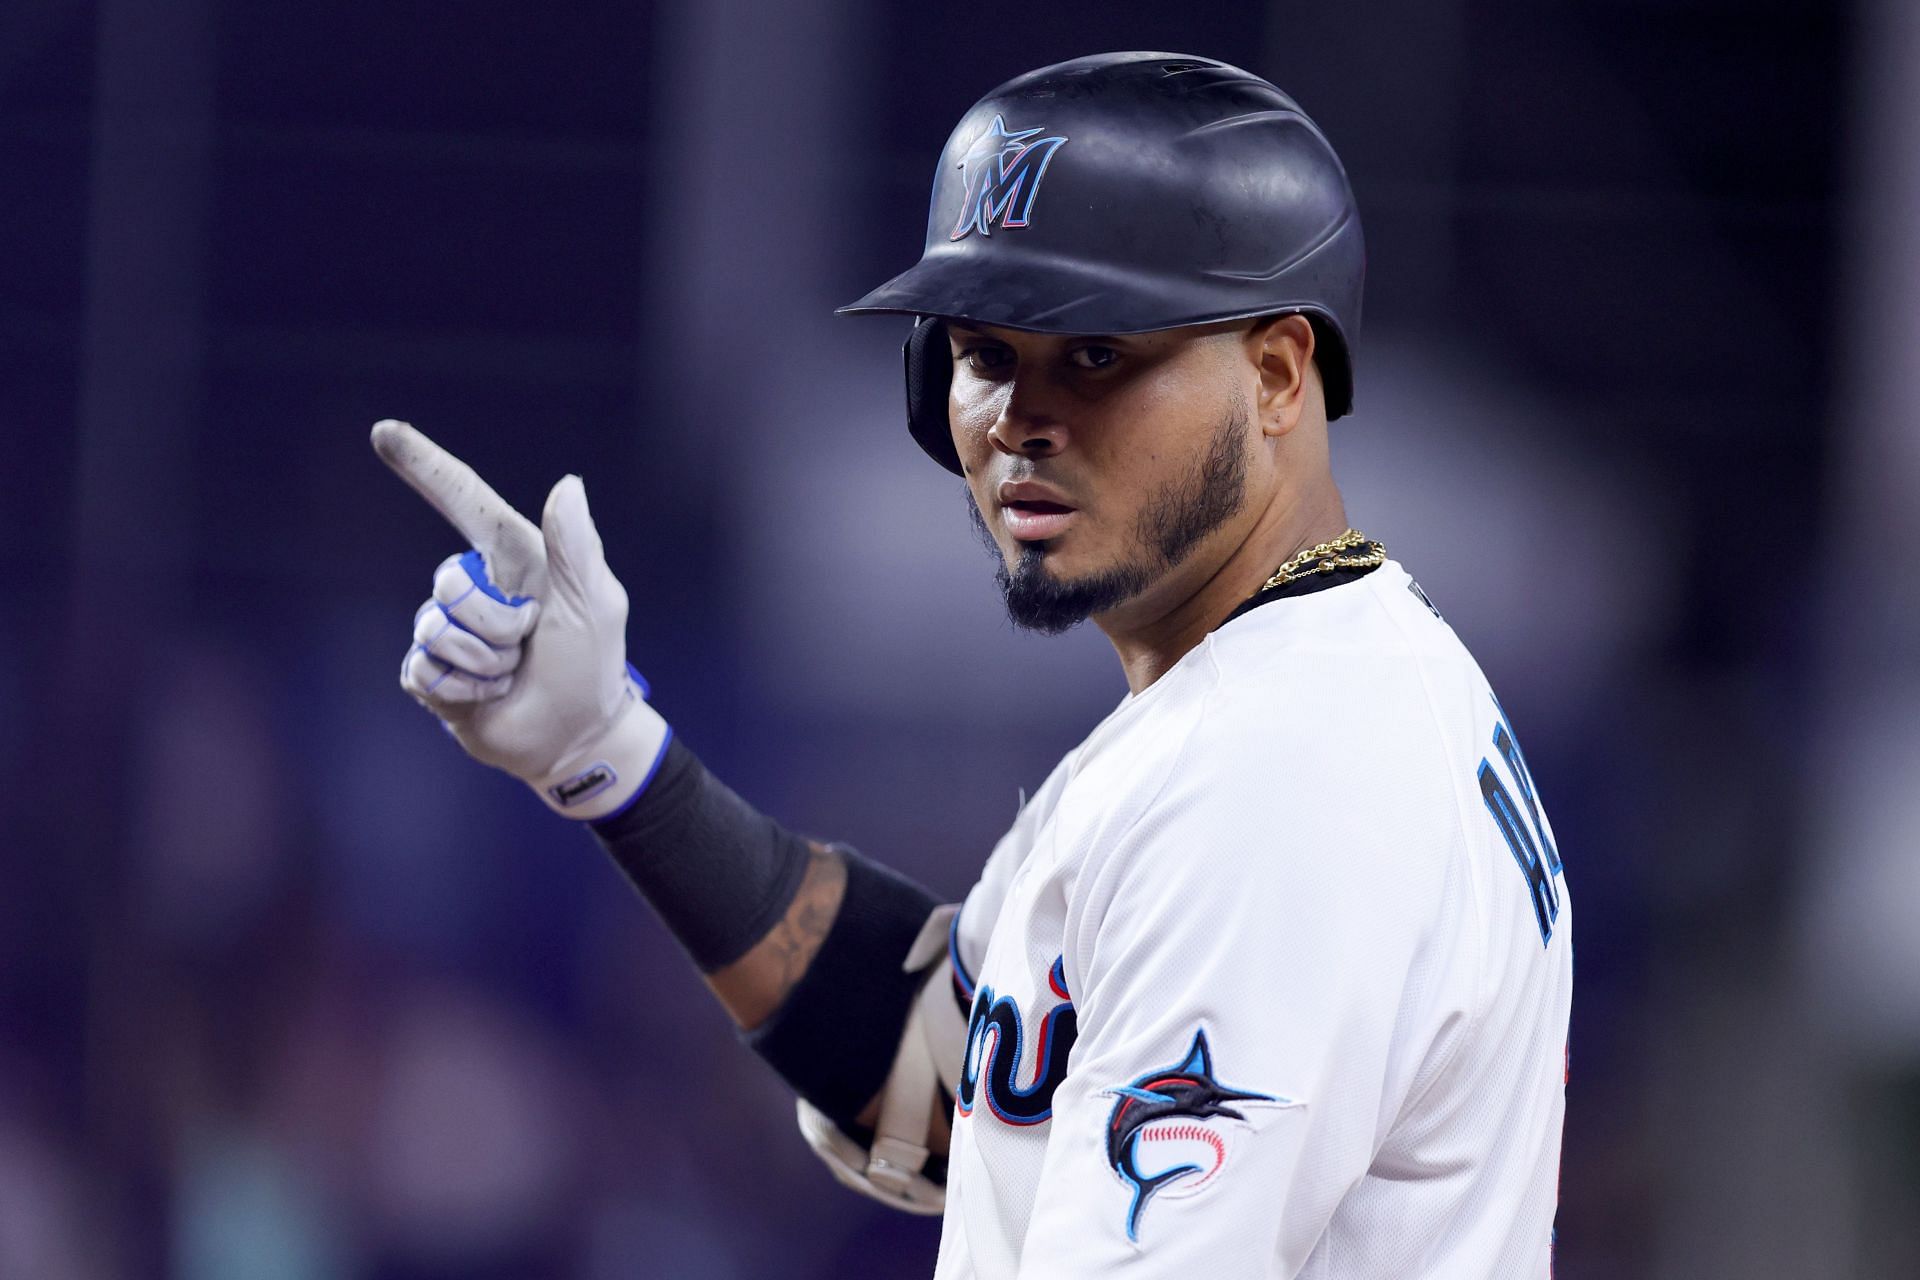 Luis Arraez #3 of the Miami Marlins reacts after hitting a single against the Toronto Blue Jays